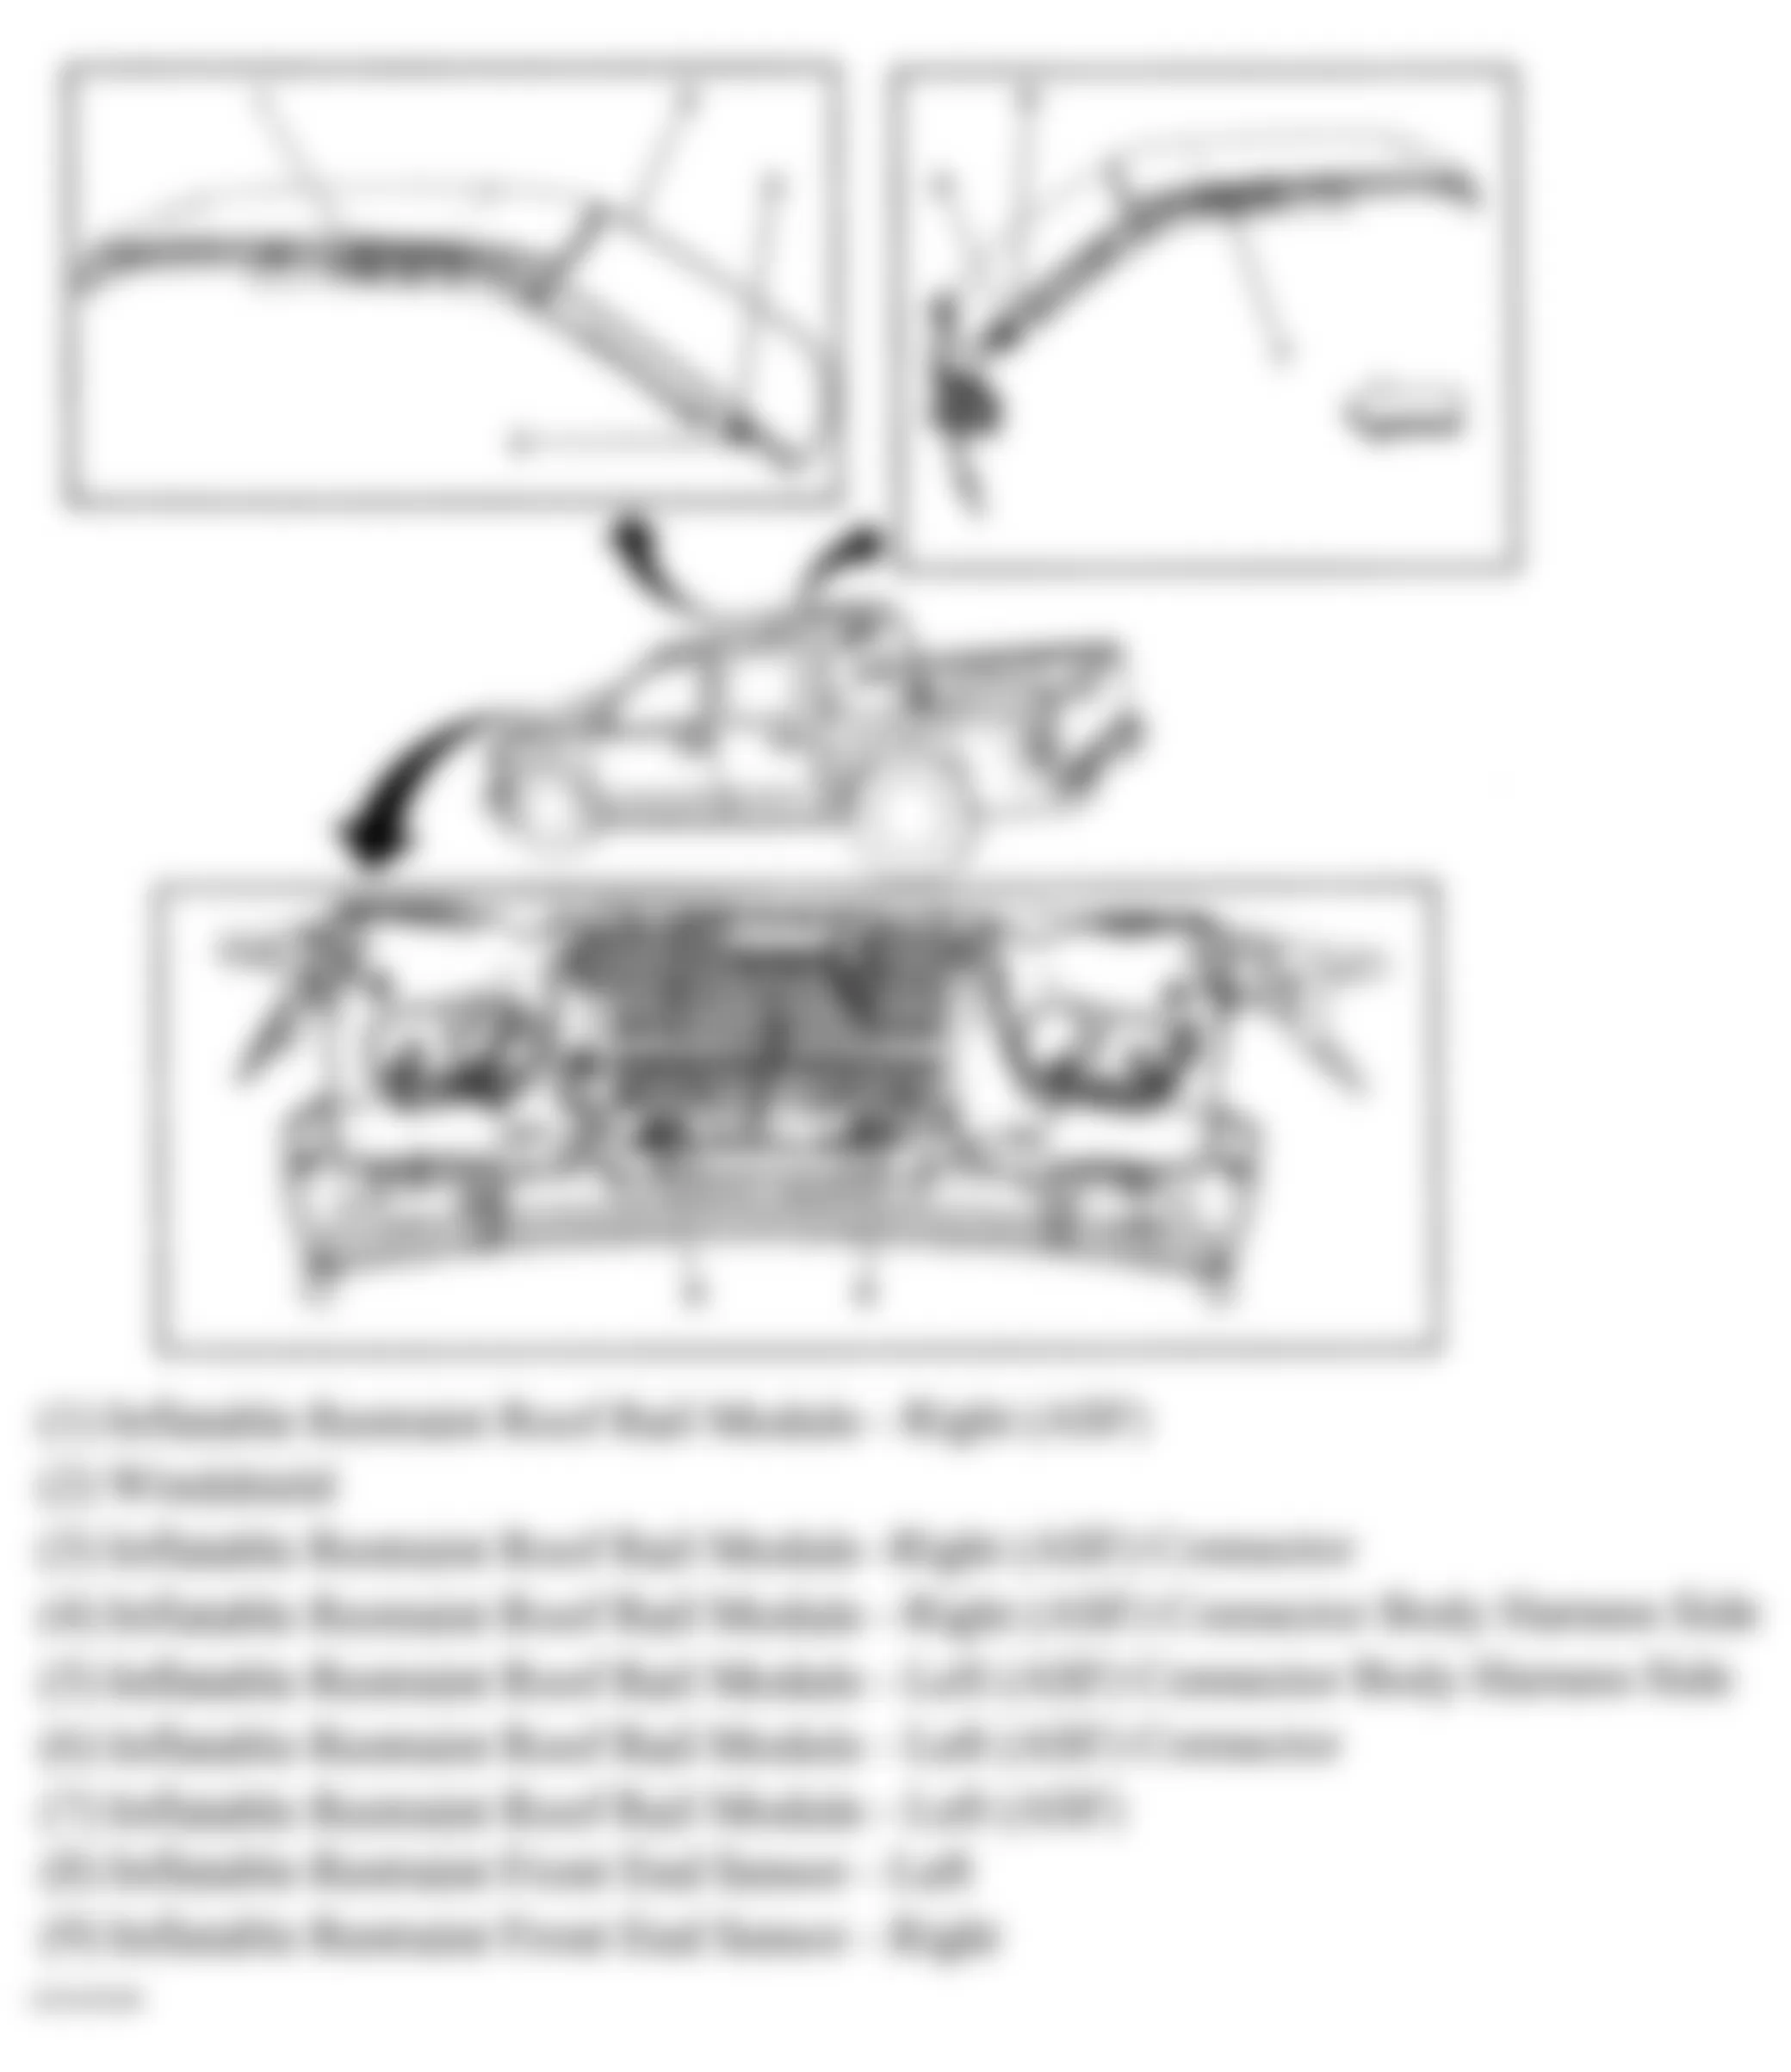 Chevrolet Colorado 2008 - Component Locations -  SIR System Front/Roof Rail